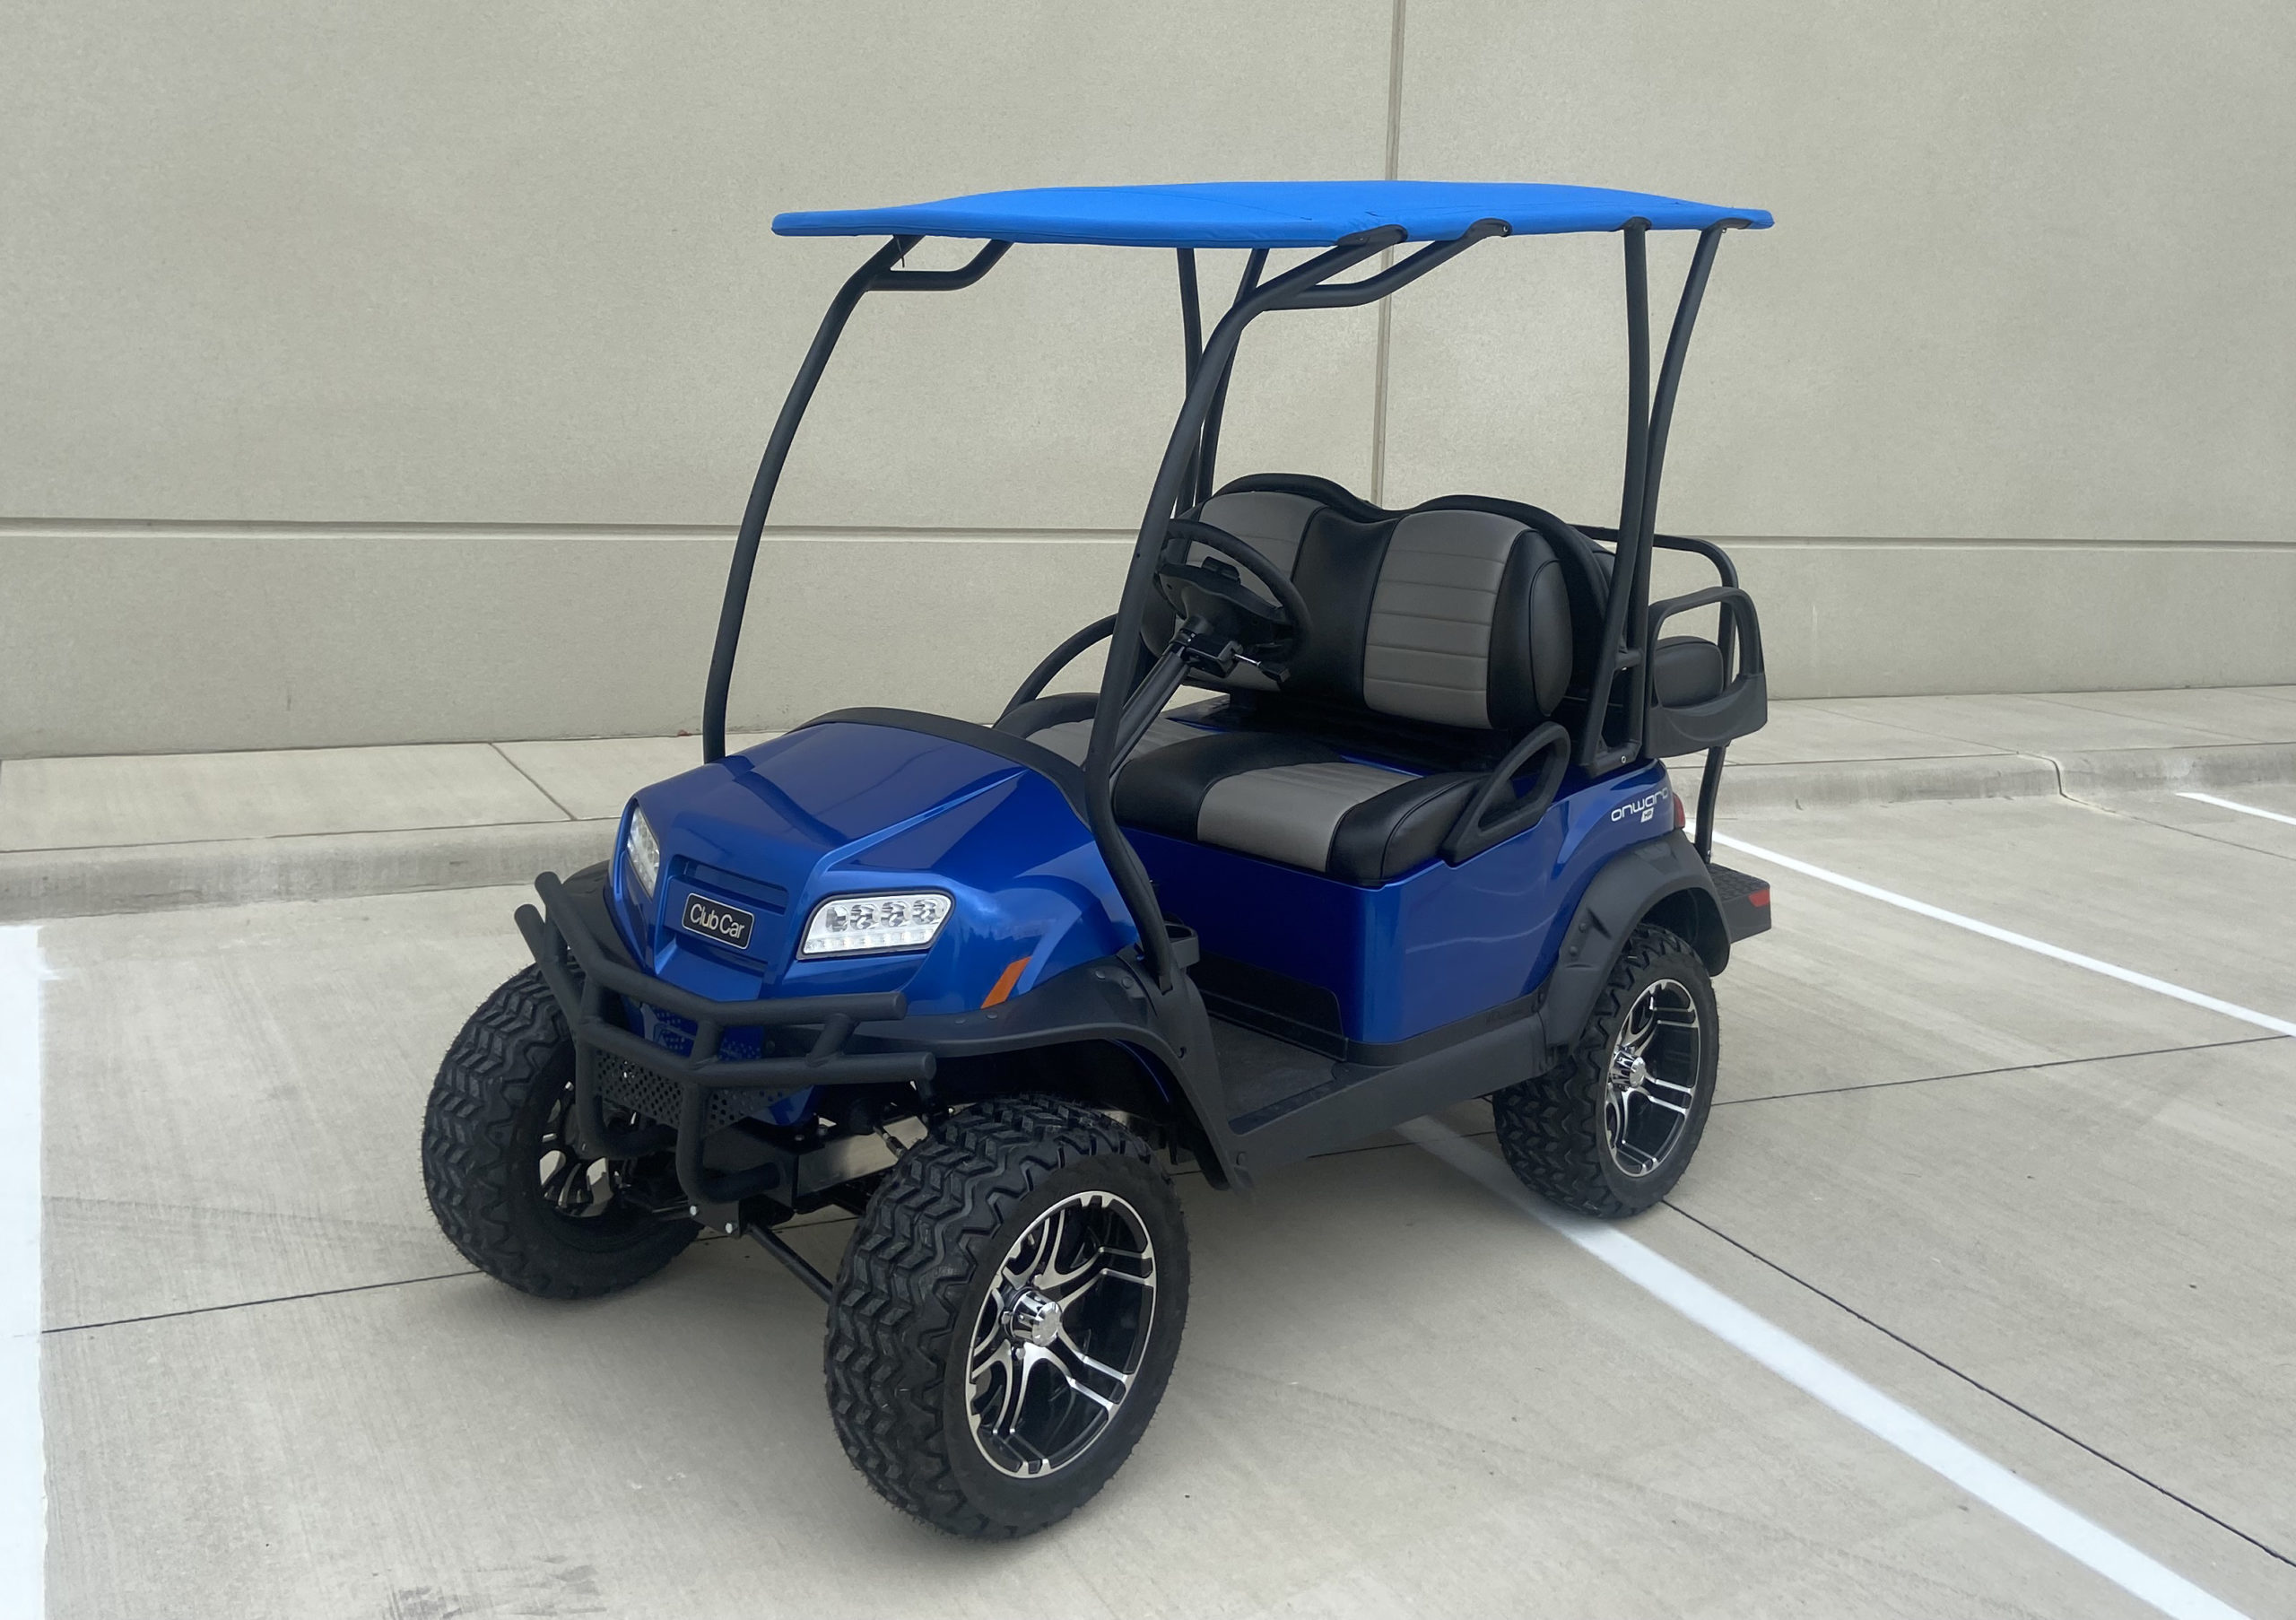 Meyer Distributing Announces Winner of Golf Cart Giveaway | THE SHOP